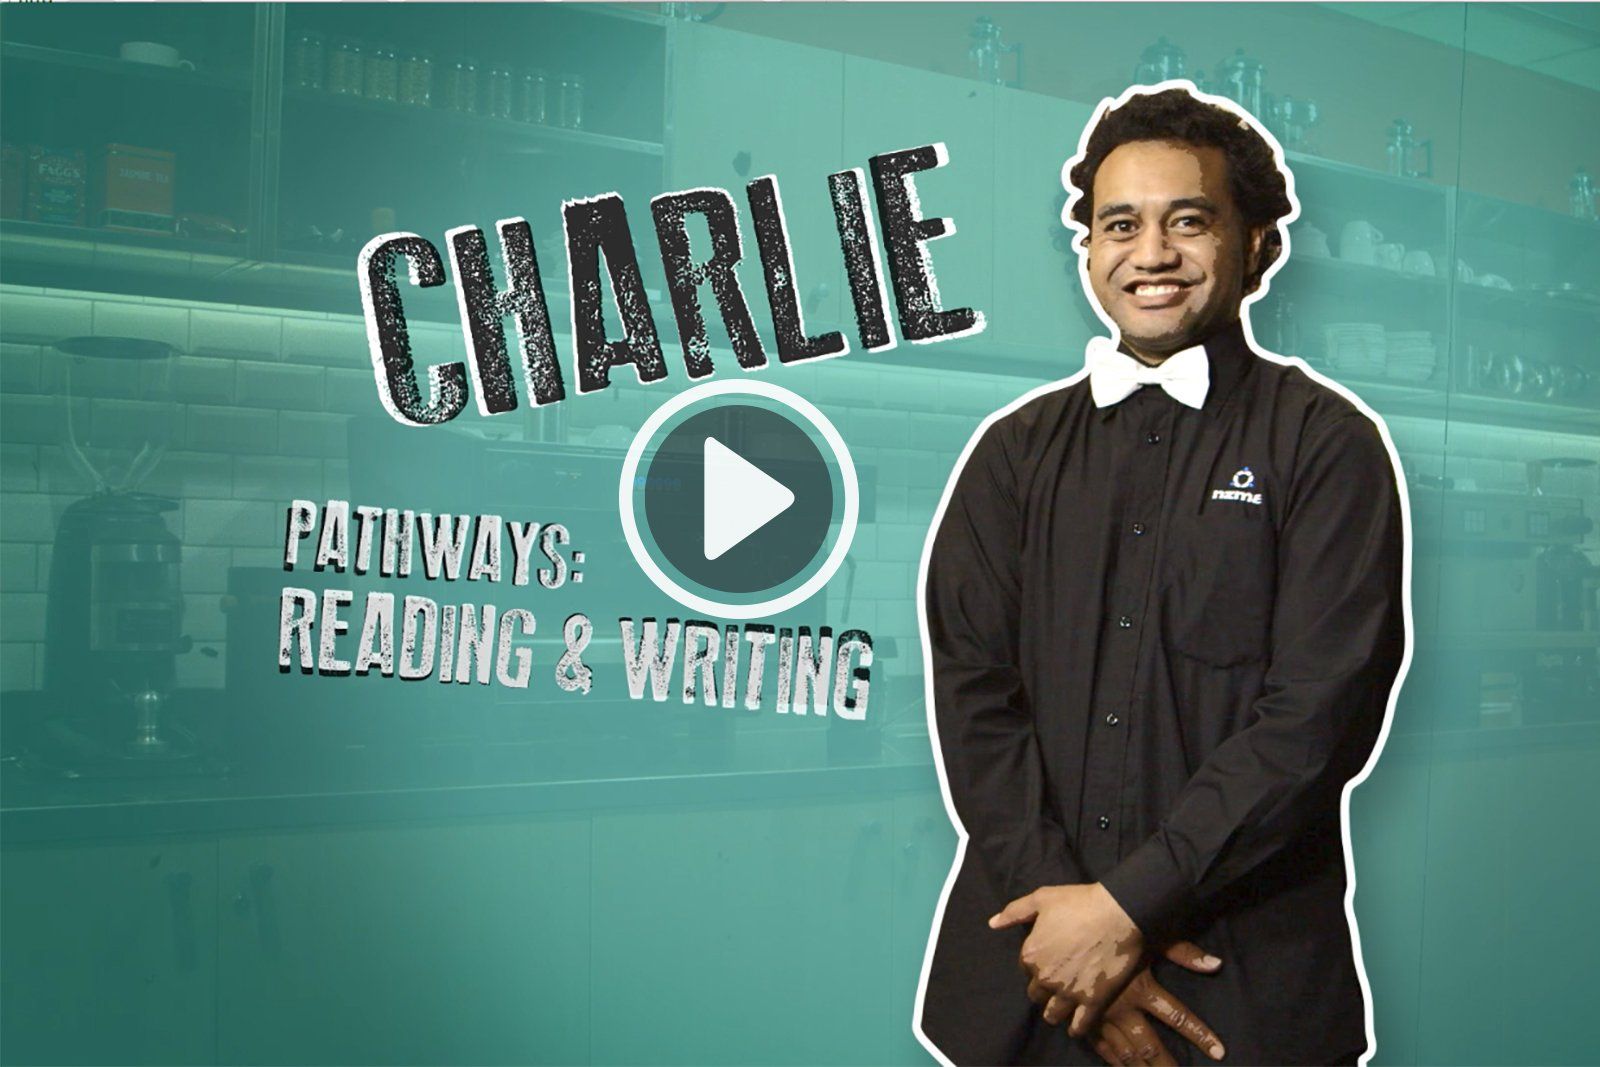 Charlie talks about the Reading and Writing pathways.